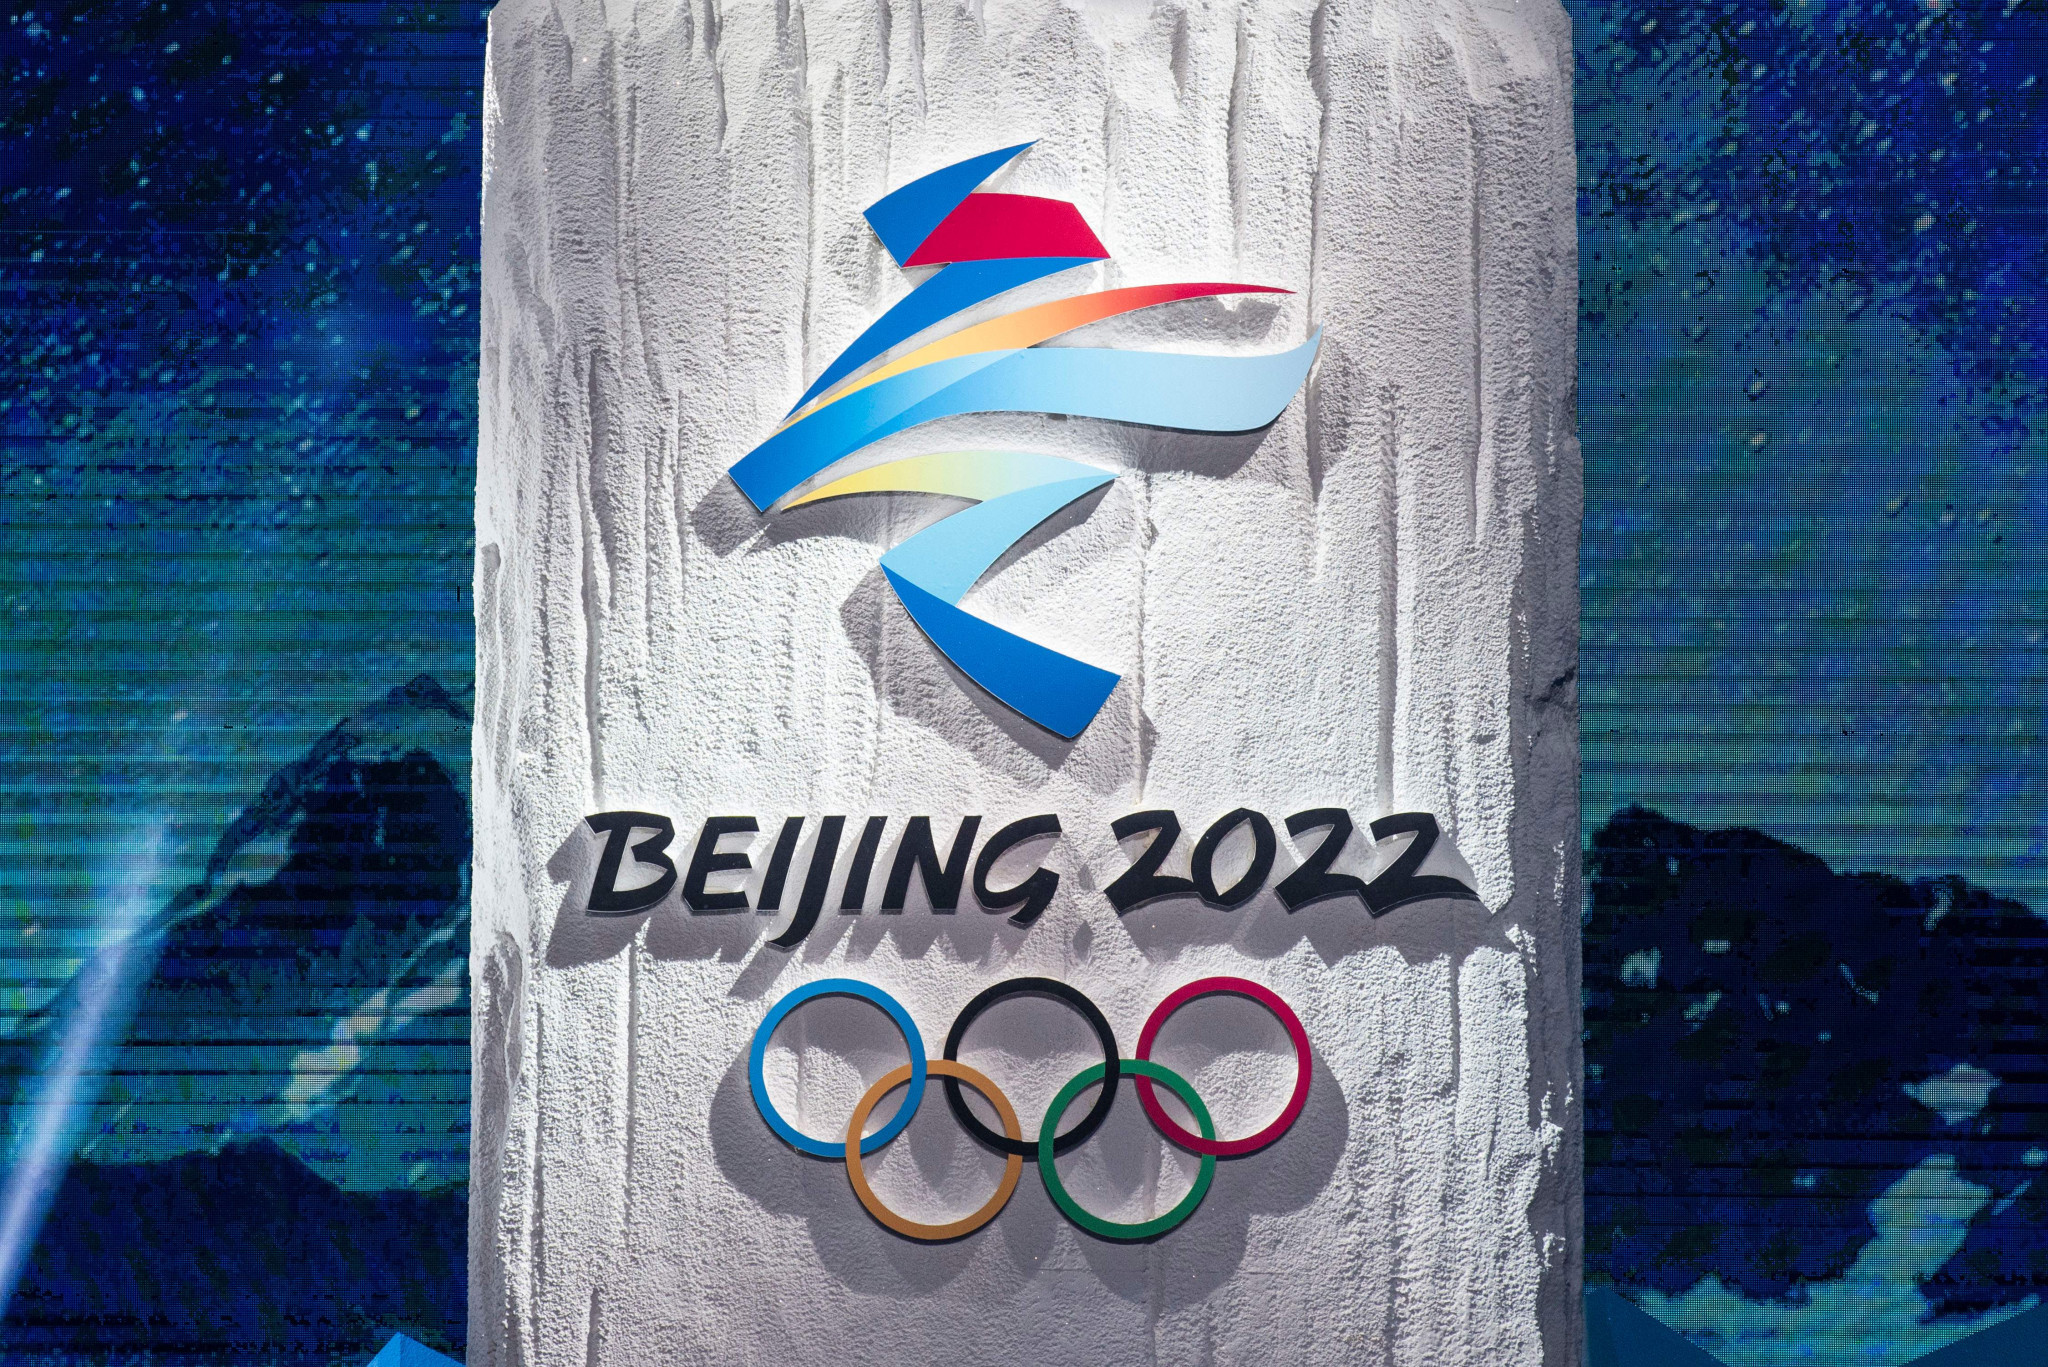 A US Congressional panel has called on the IOC to strip Beijing of the 2022 Winter Olympics because of alleged human rights abuses ©Getty Images